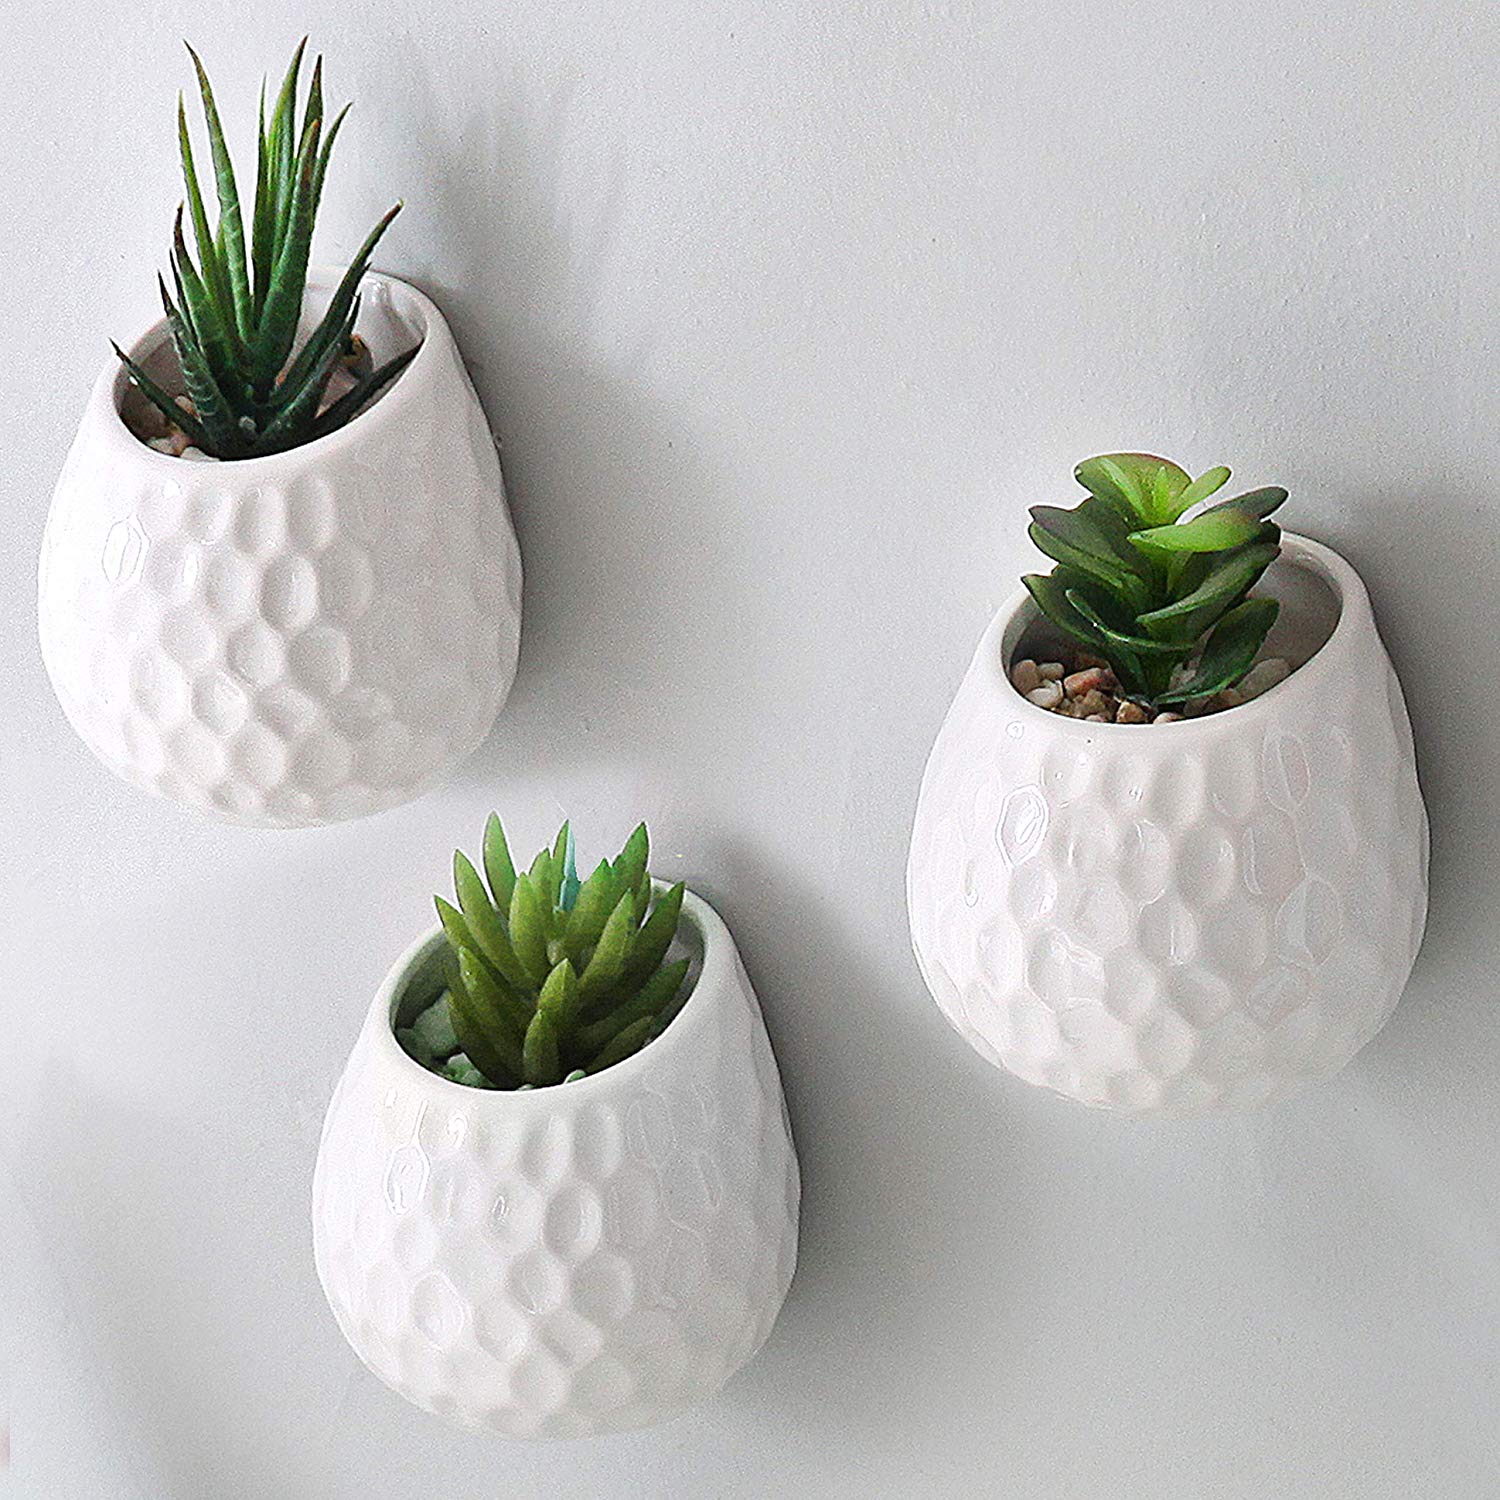 4-Inch Golf Ball-Inspired White Ceramic Wall-Mountable Mini Planters